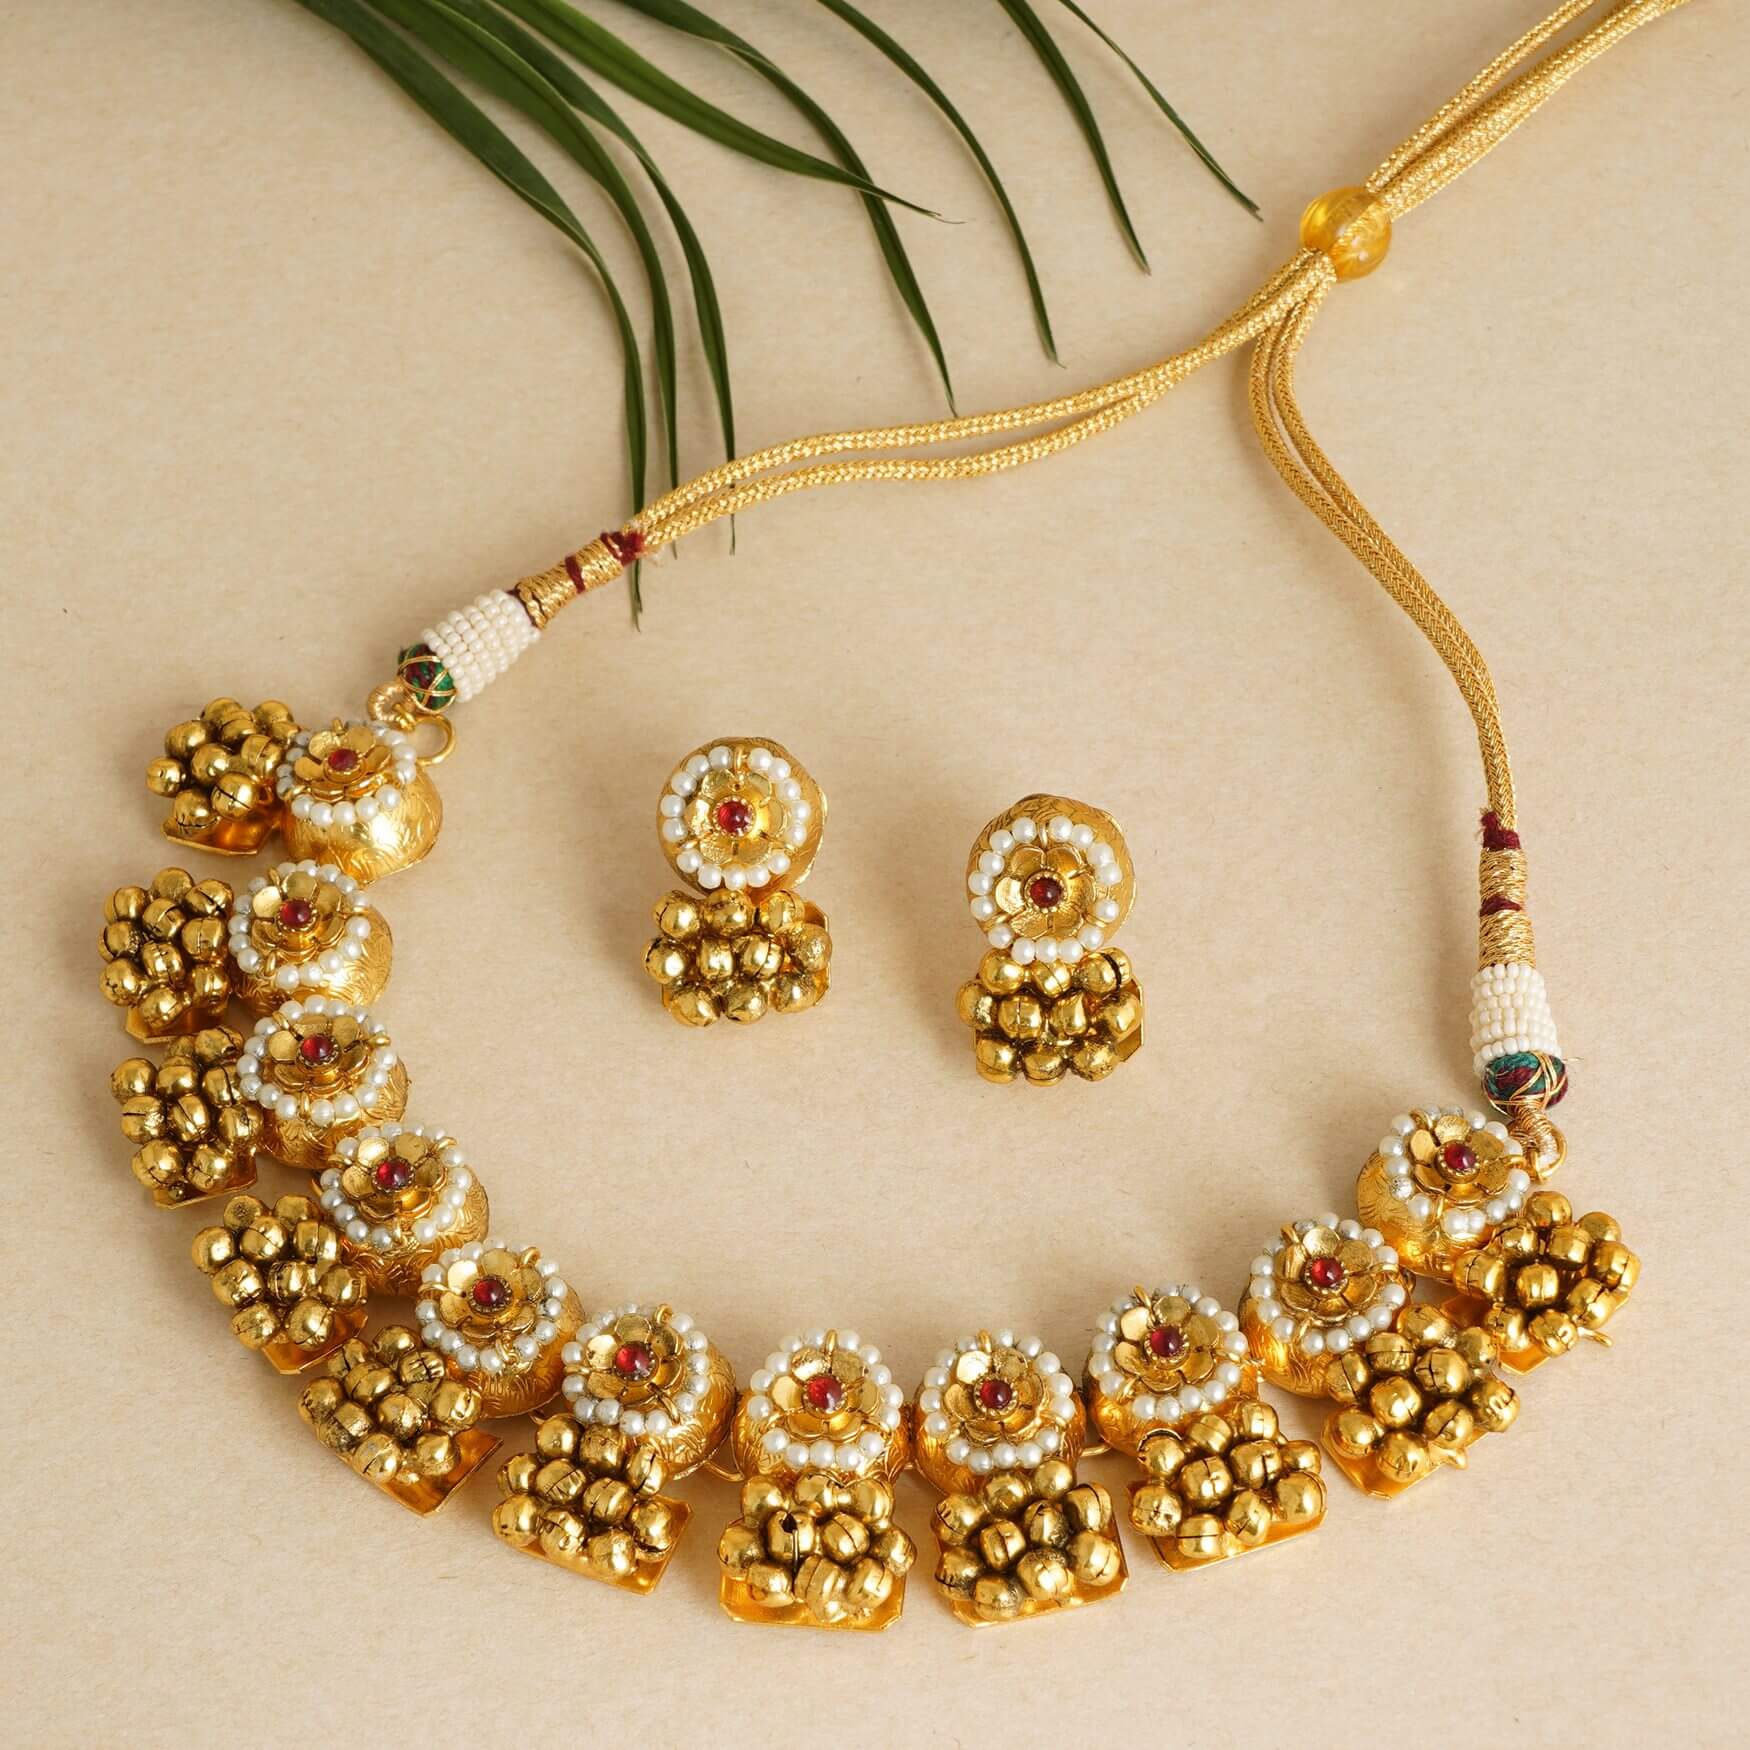 necklace to wear on saree